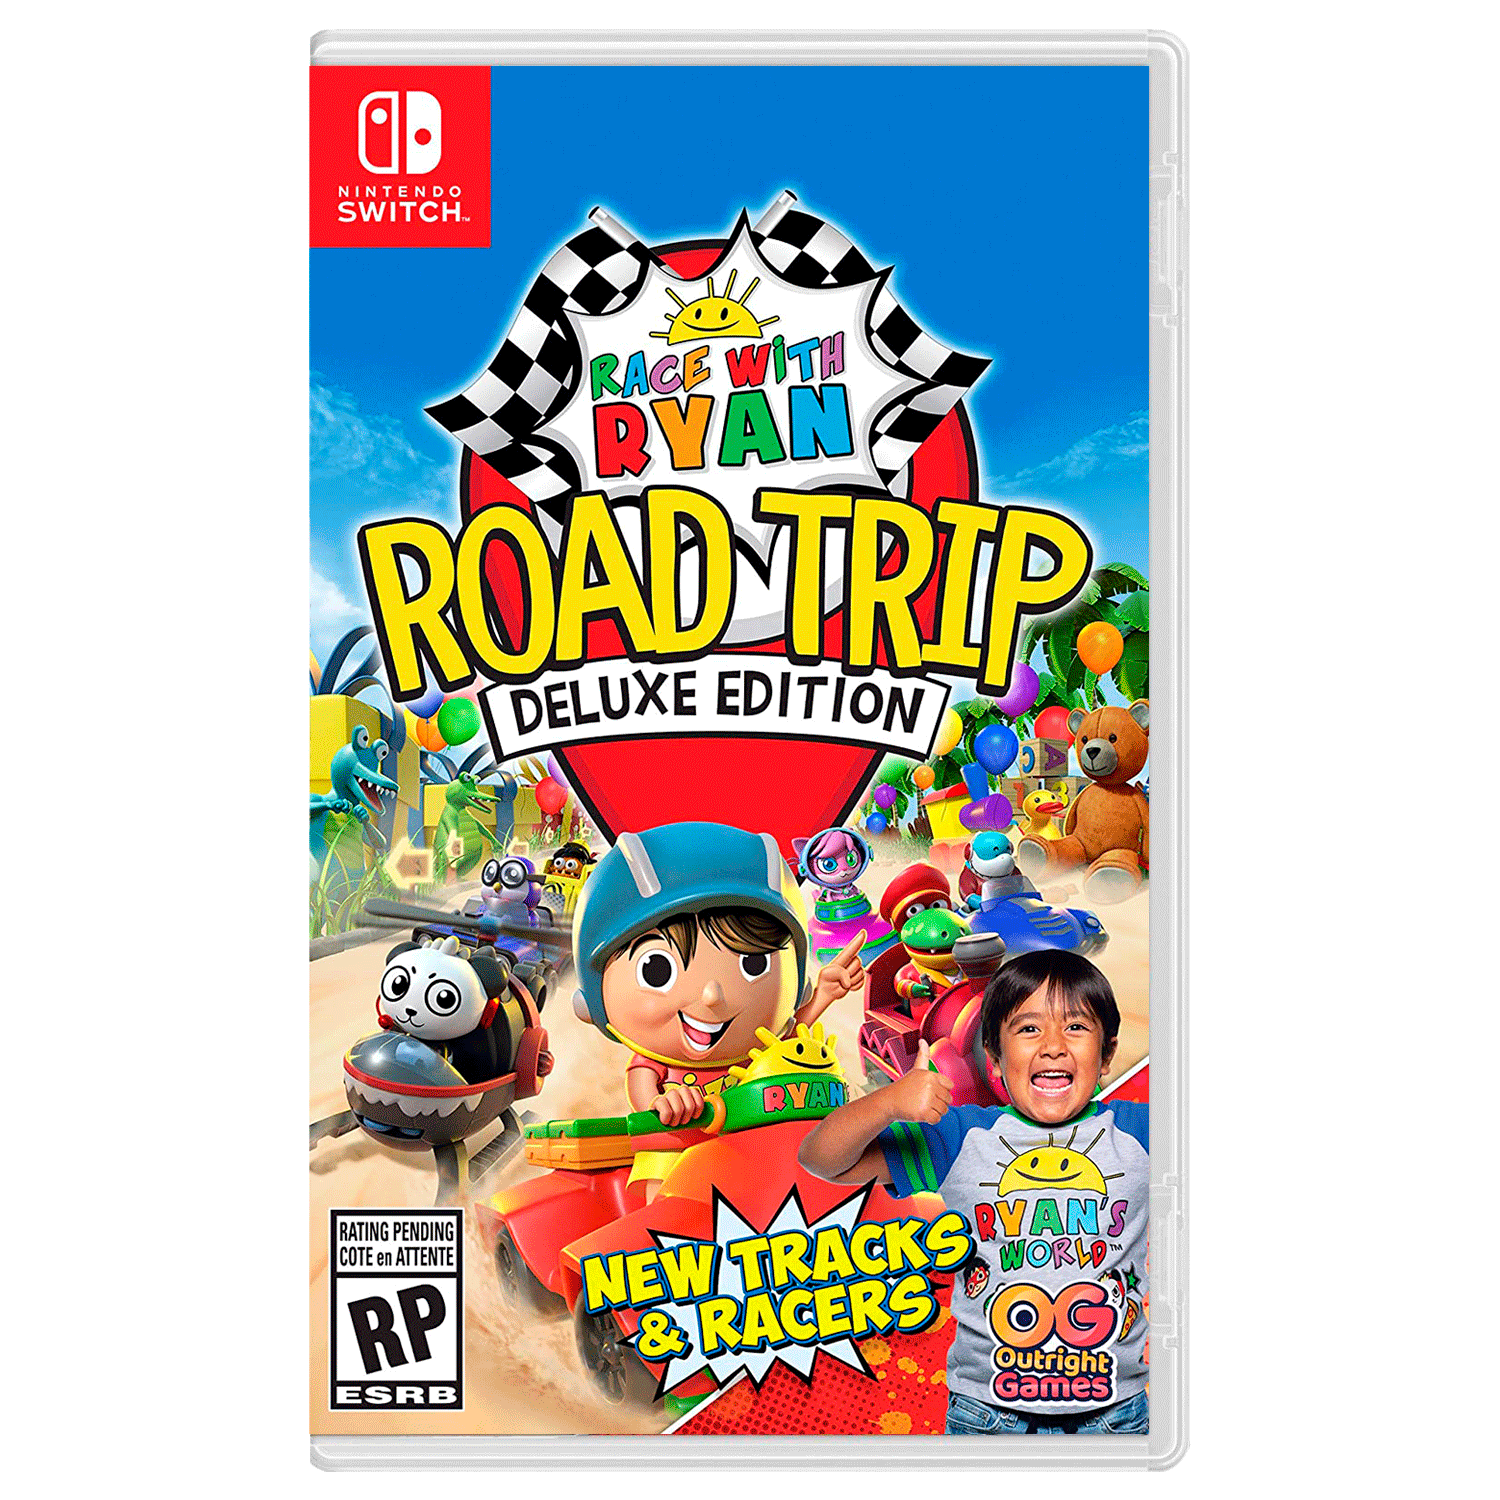 Jogo Race With Ryan Road Trip Deluxe Edition para Nintendo Switch